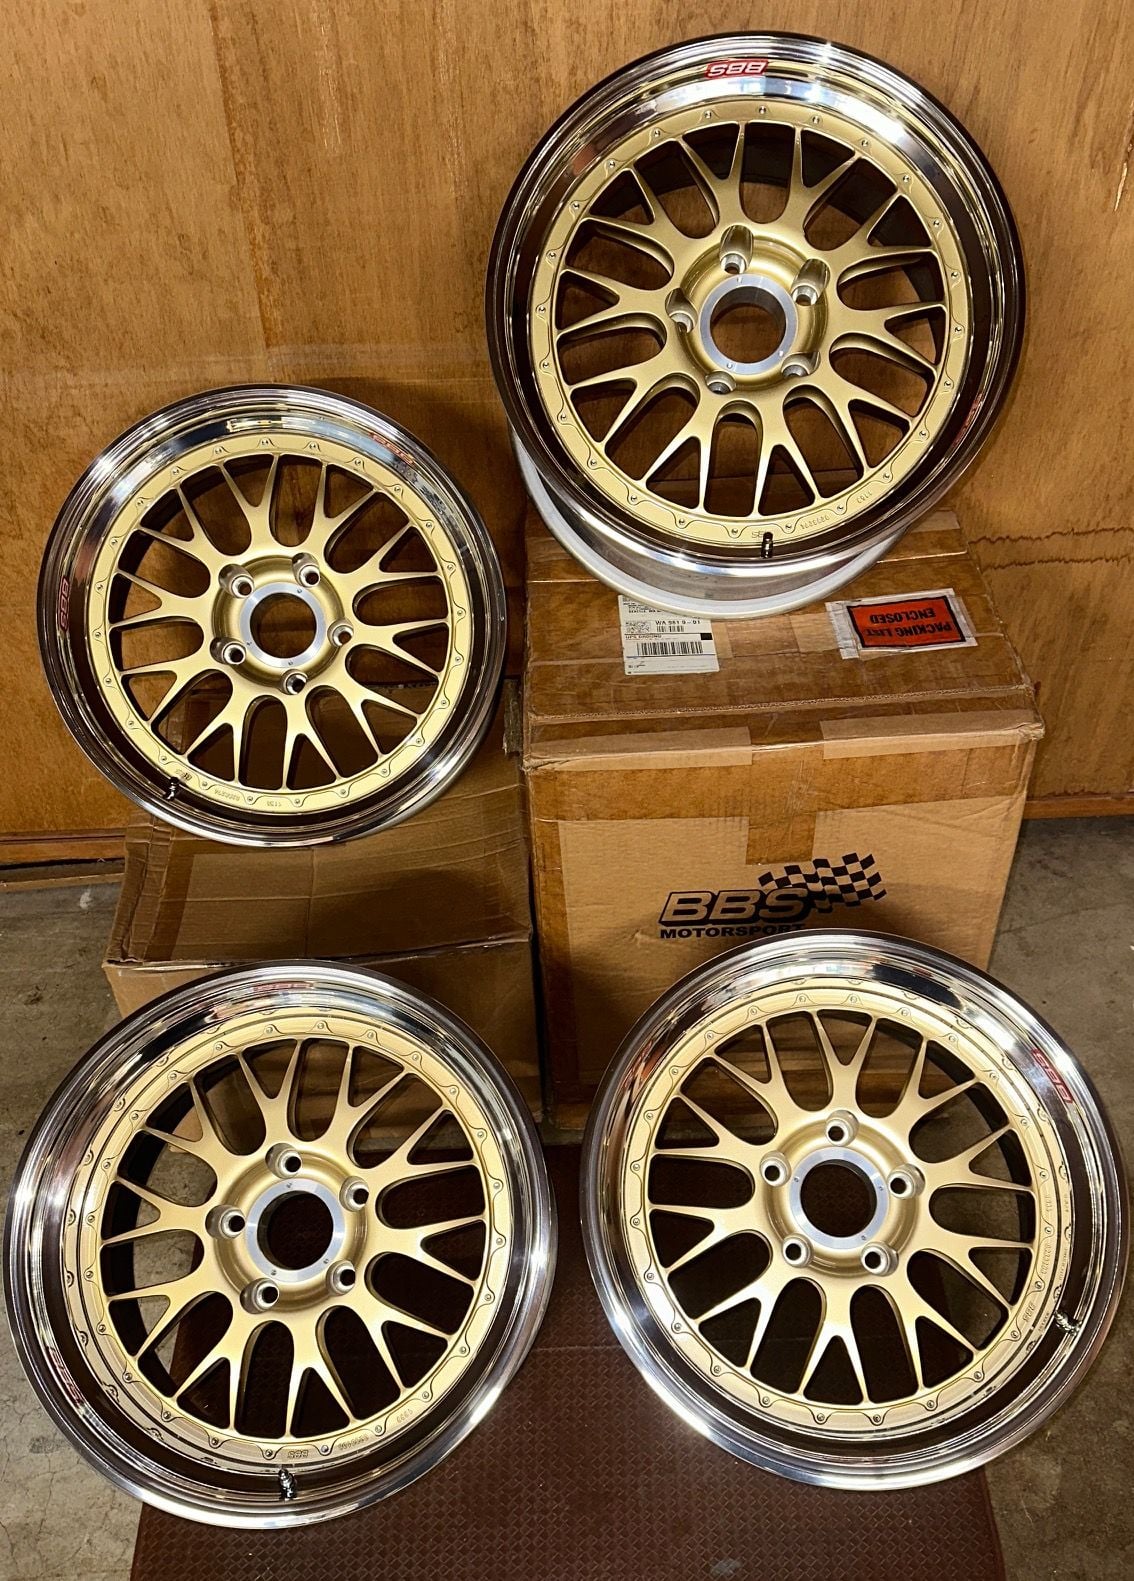 Wheels and Tires/Axles - BBS E88 - Porsche - 996 turbo GT3 - 997 turbo GT3 - 18x10 - 18x12.5 Brand New - New - Seattle, WA 98112, United States